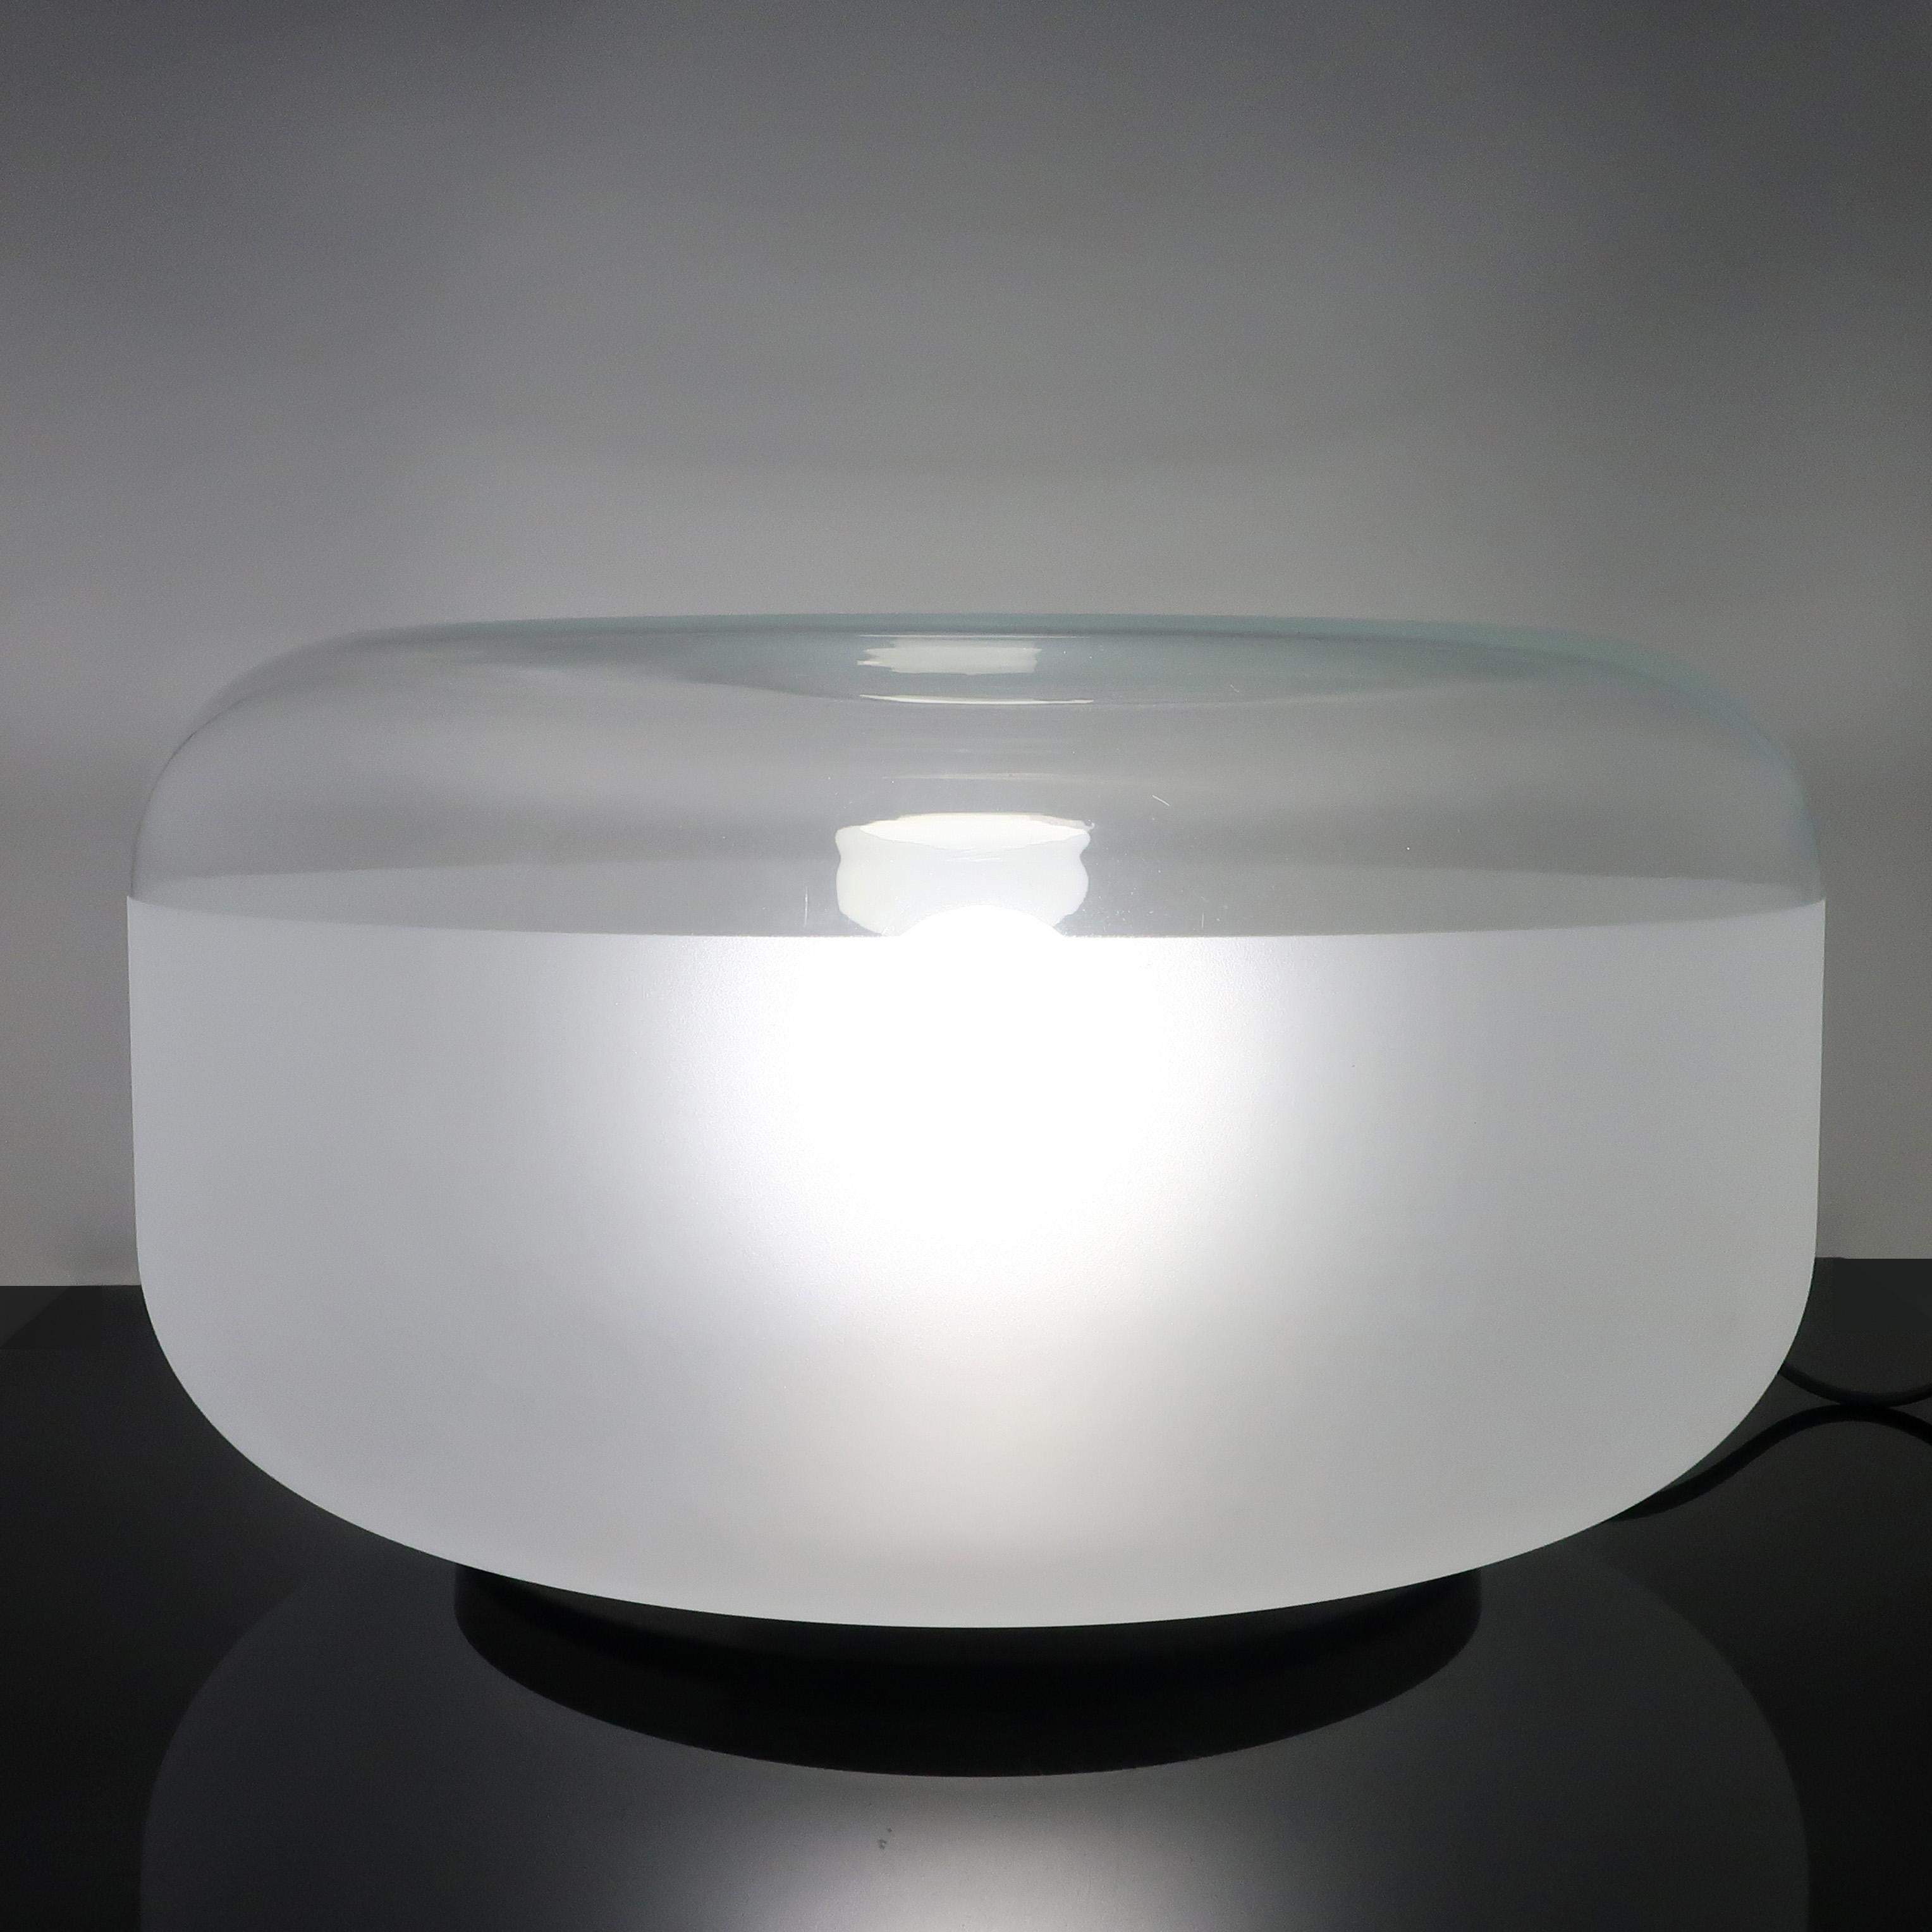 A lovely 2003 glass table lamp designed by Pearson Lloyd for ClassiCon. The top of the glass shade is clear while the sides and bottom are frosted to throw light that is crisp yet diffused. Glass shade sits on top of an aluminum base that includes a